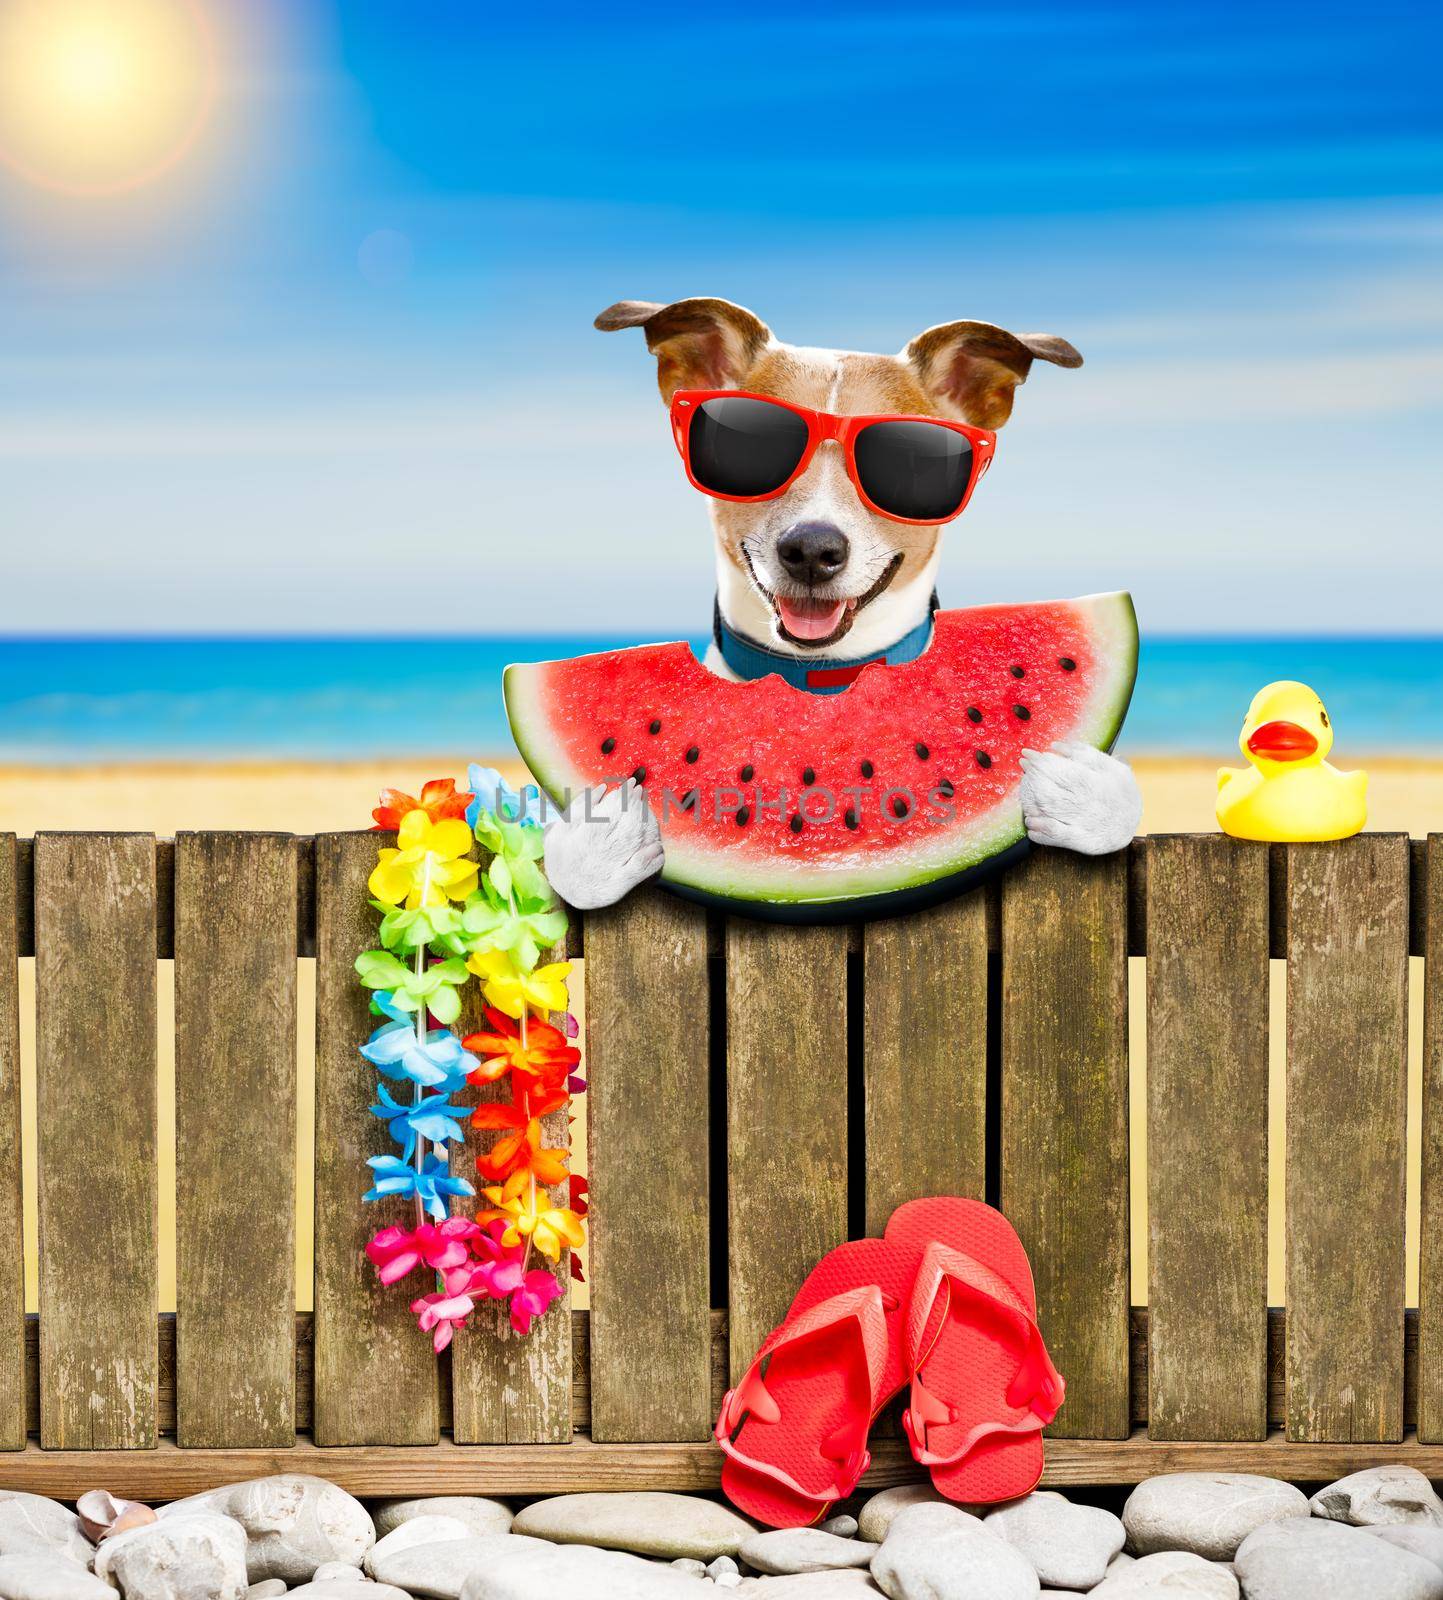 jack russel dog resting and relaxing on a wall or fence at the  beach  ocean shore, on summer vacation holidays, wearing sunglasses eating a watermelon fruit